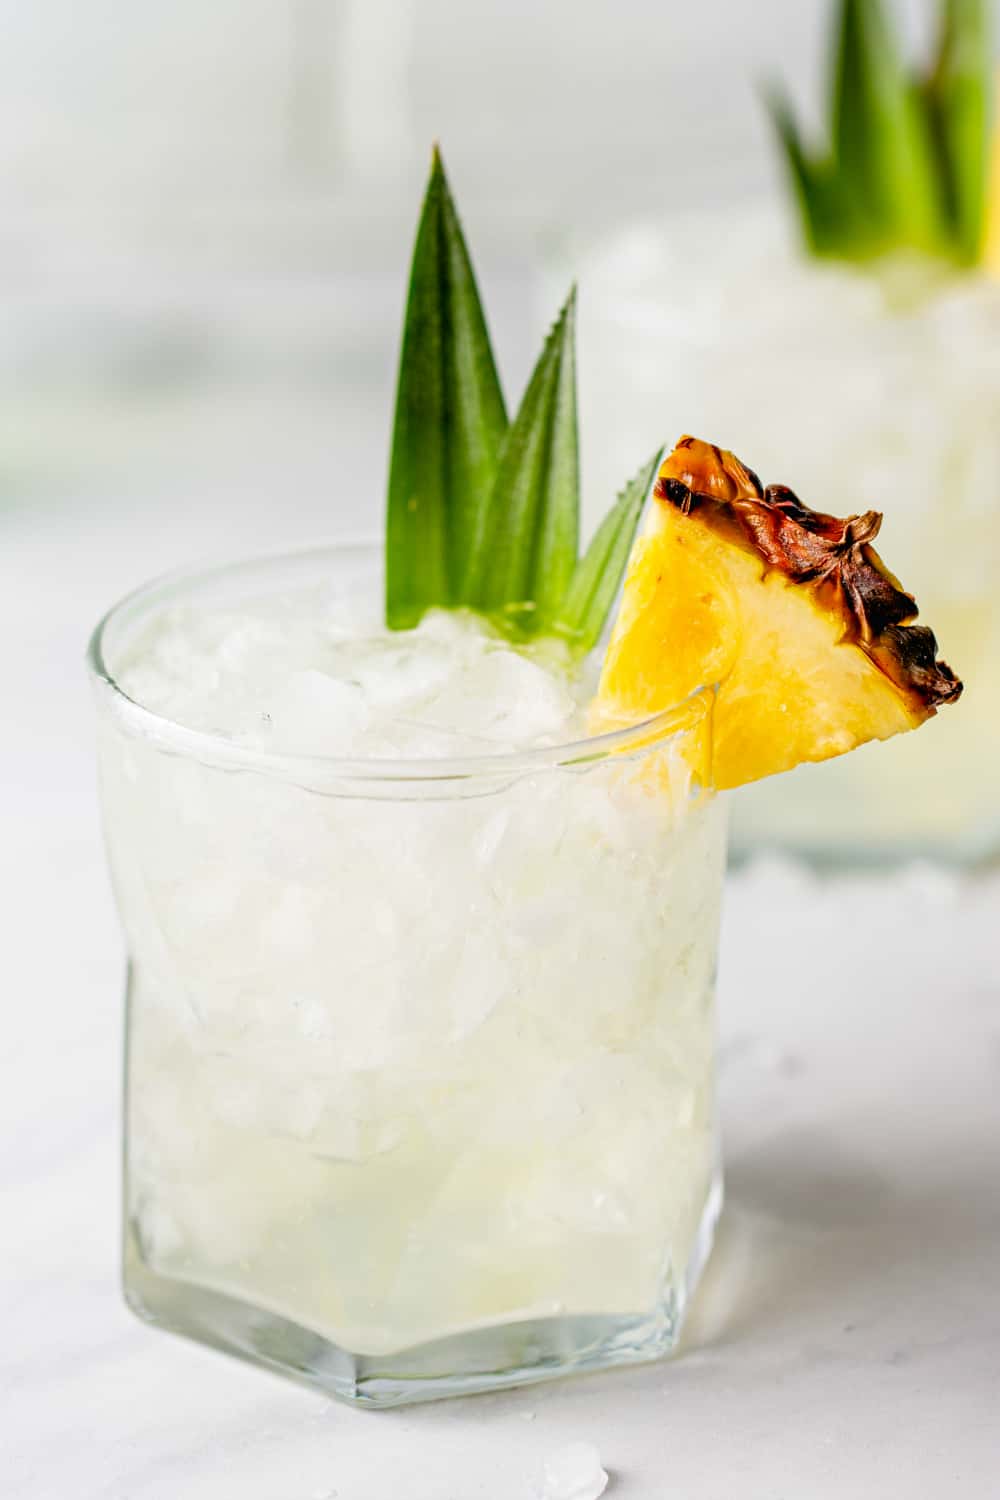 Pineapple vodka in a rocks glass, garnished with a slice of pineapple